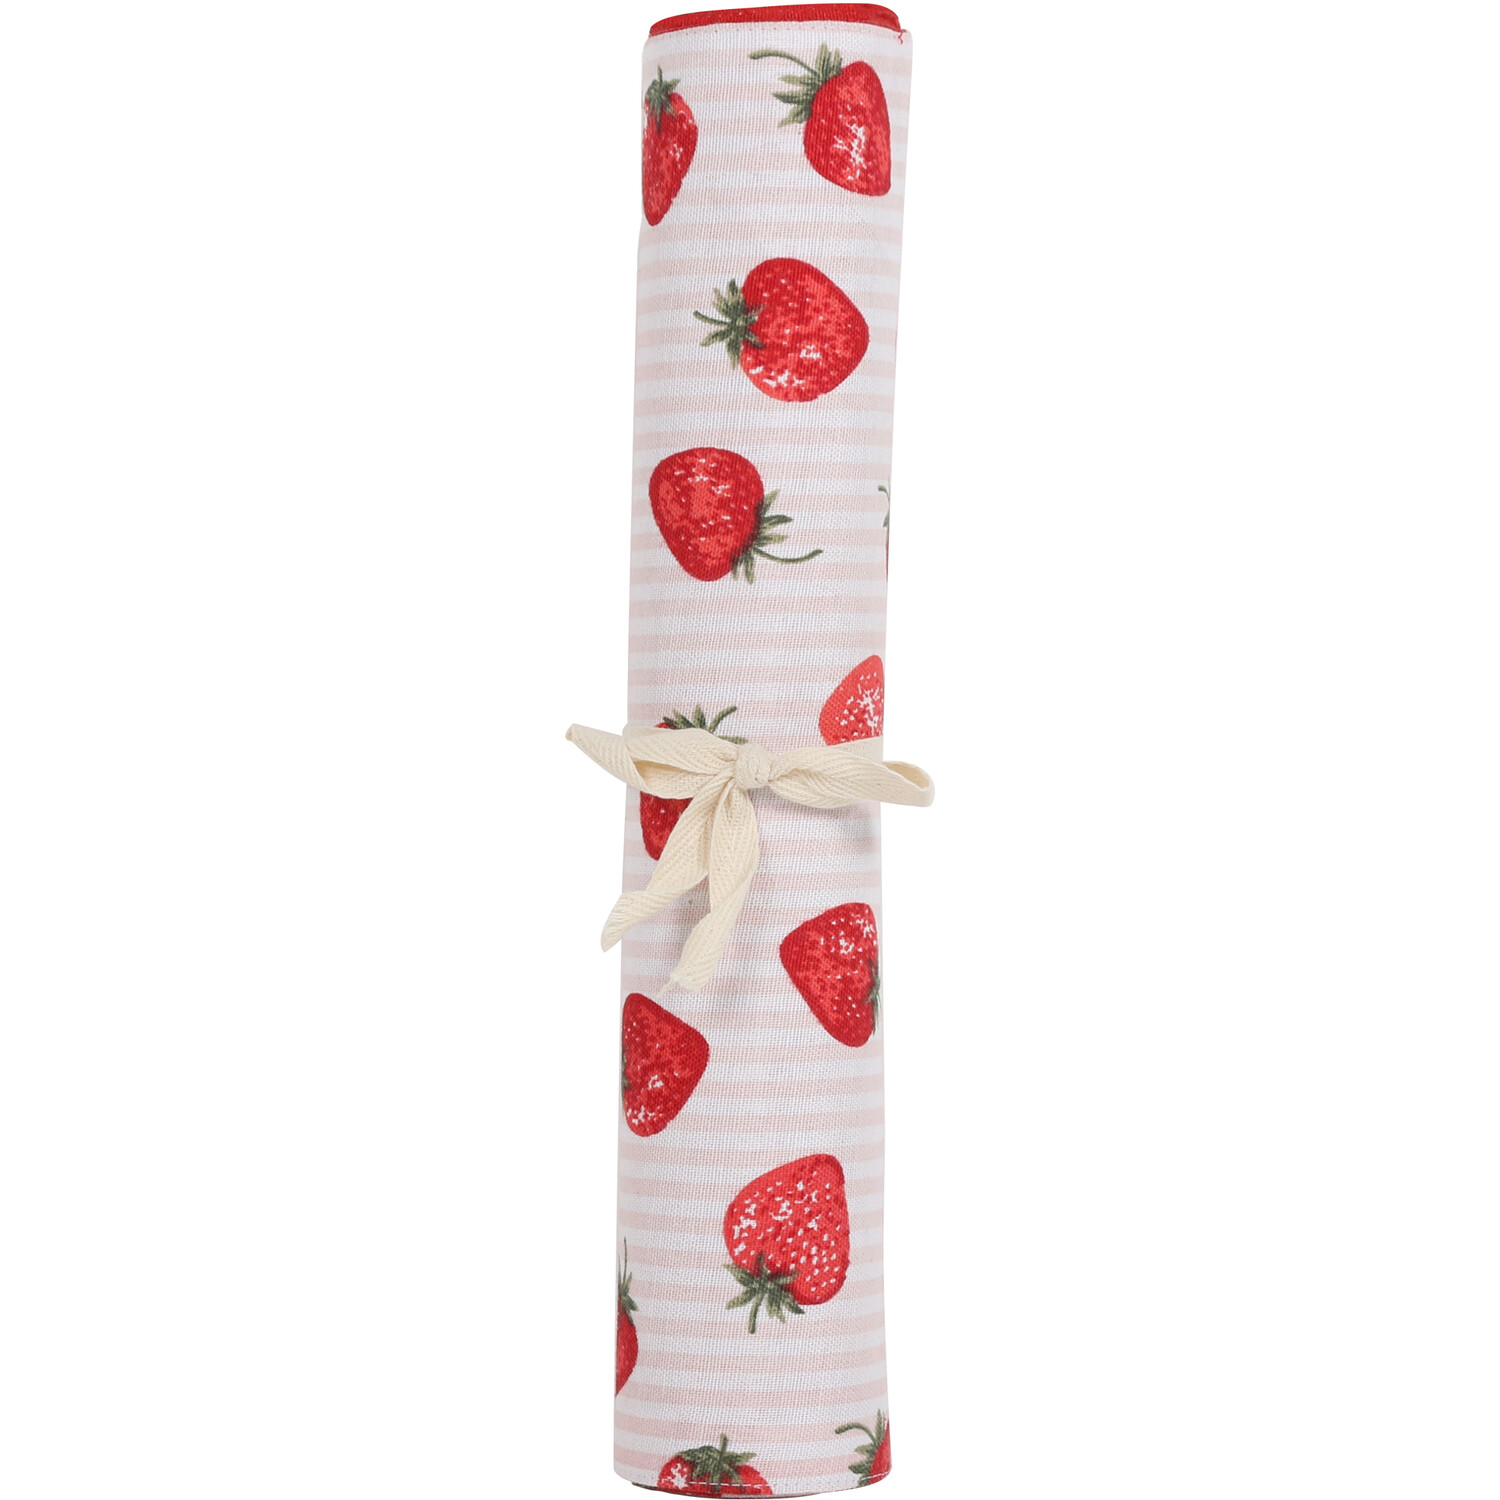 Strawberry Table Runner - Red Image 1